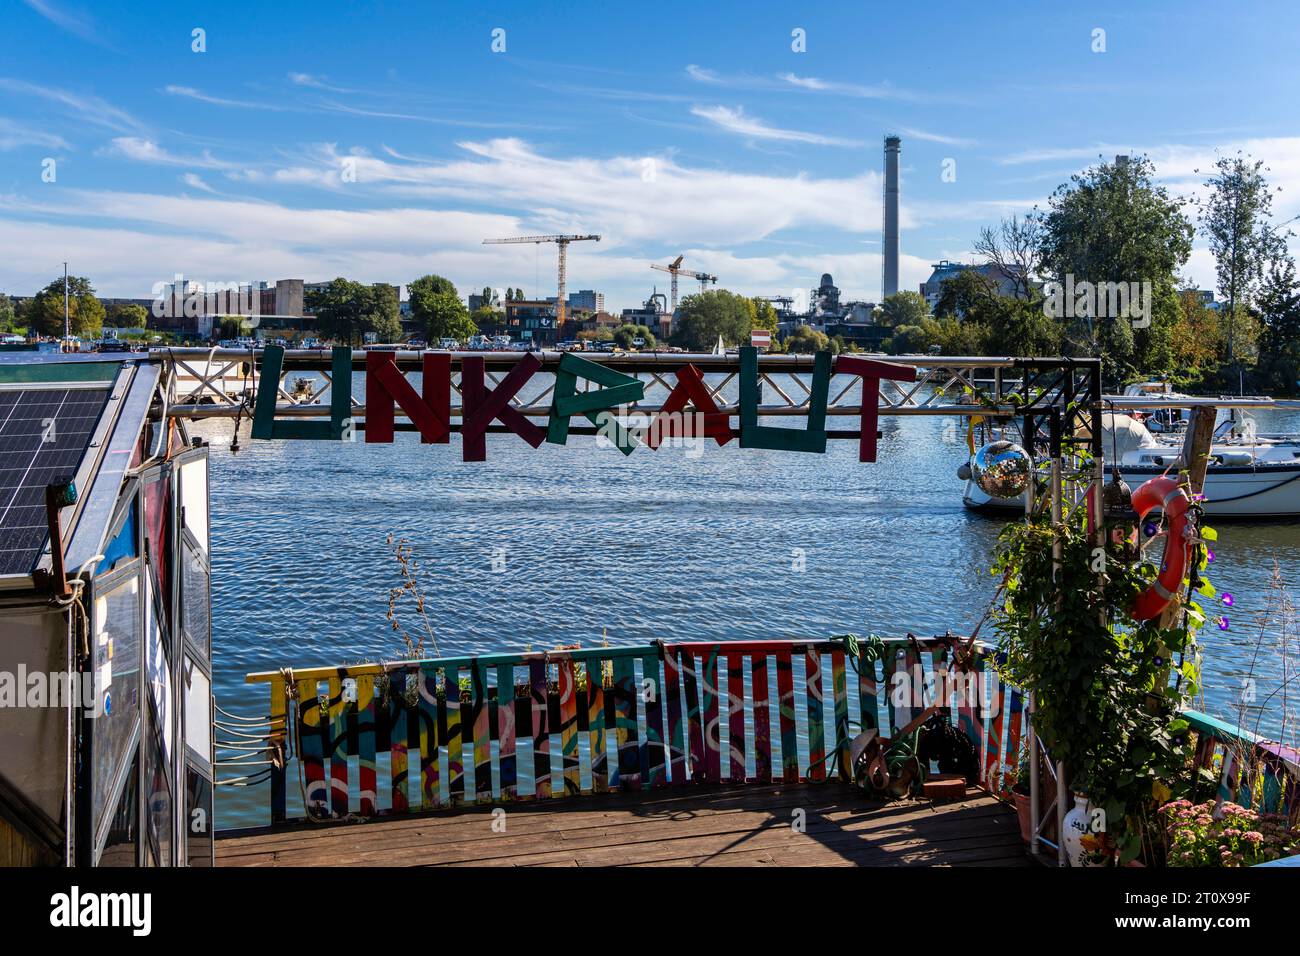 Houseboats and homeless shelters on the water in Rummelsburger Bucht, Berlin-Lichtenberg, Berlin, Germany Stock Photo